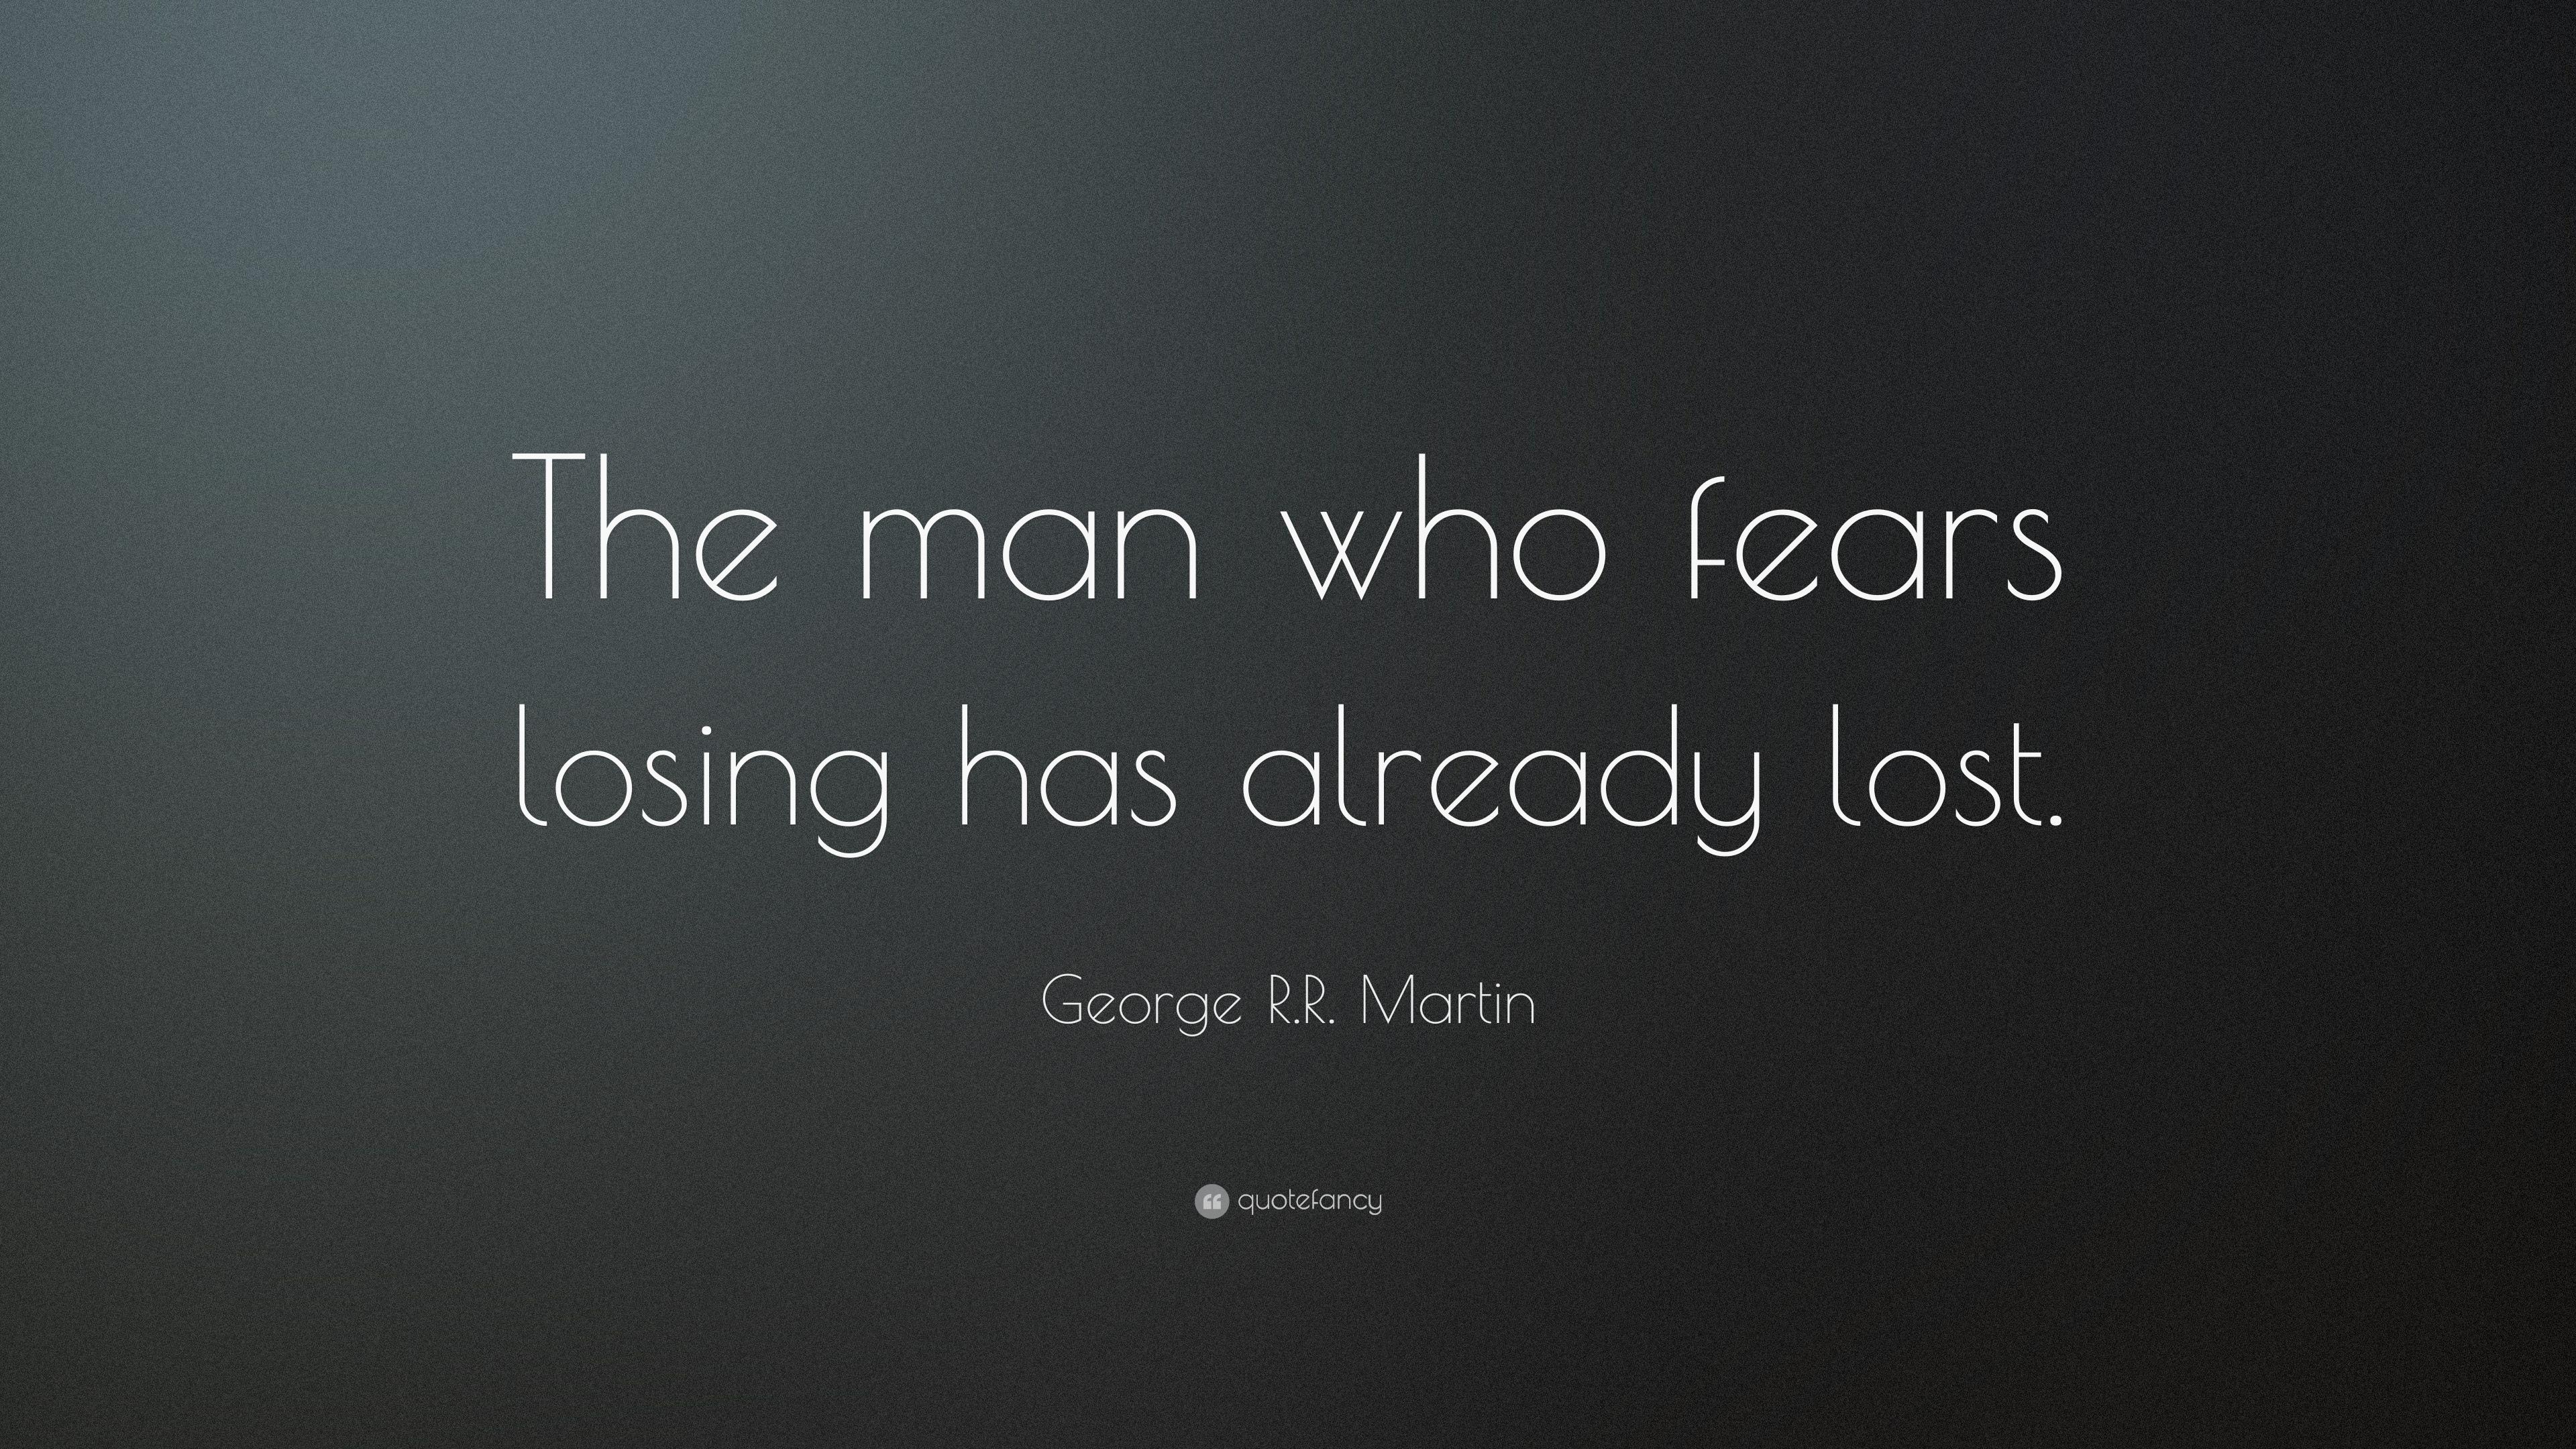 George R.R. Martin Quote: “The man who fears losing has already lost